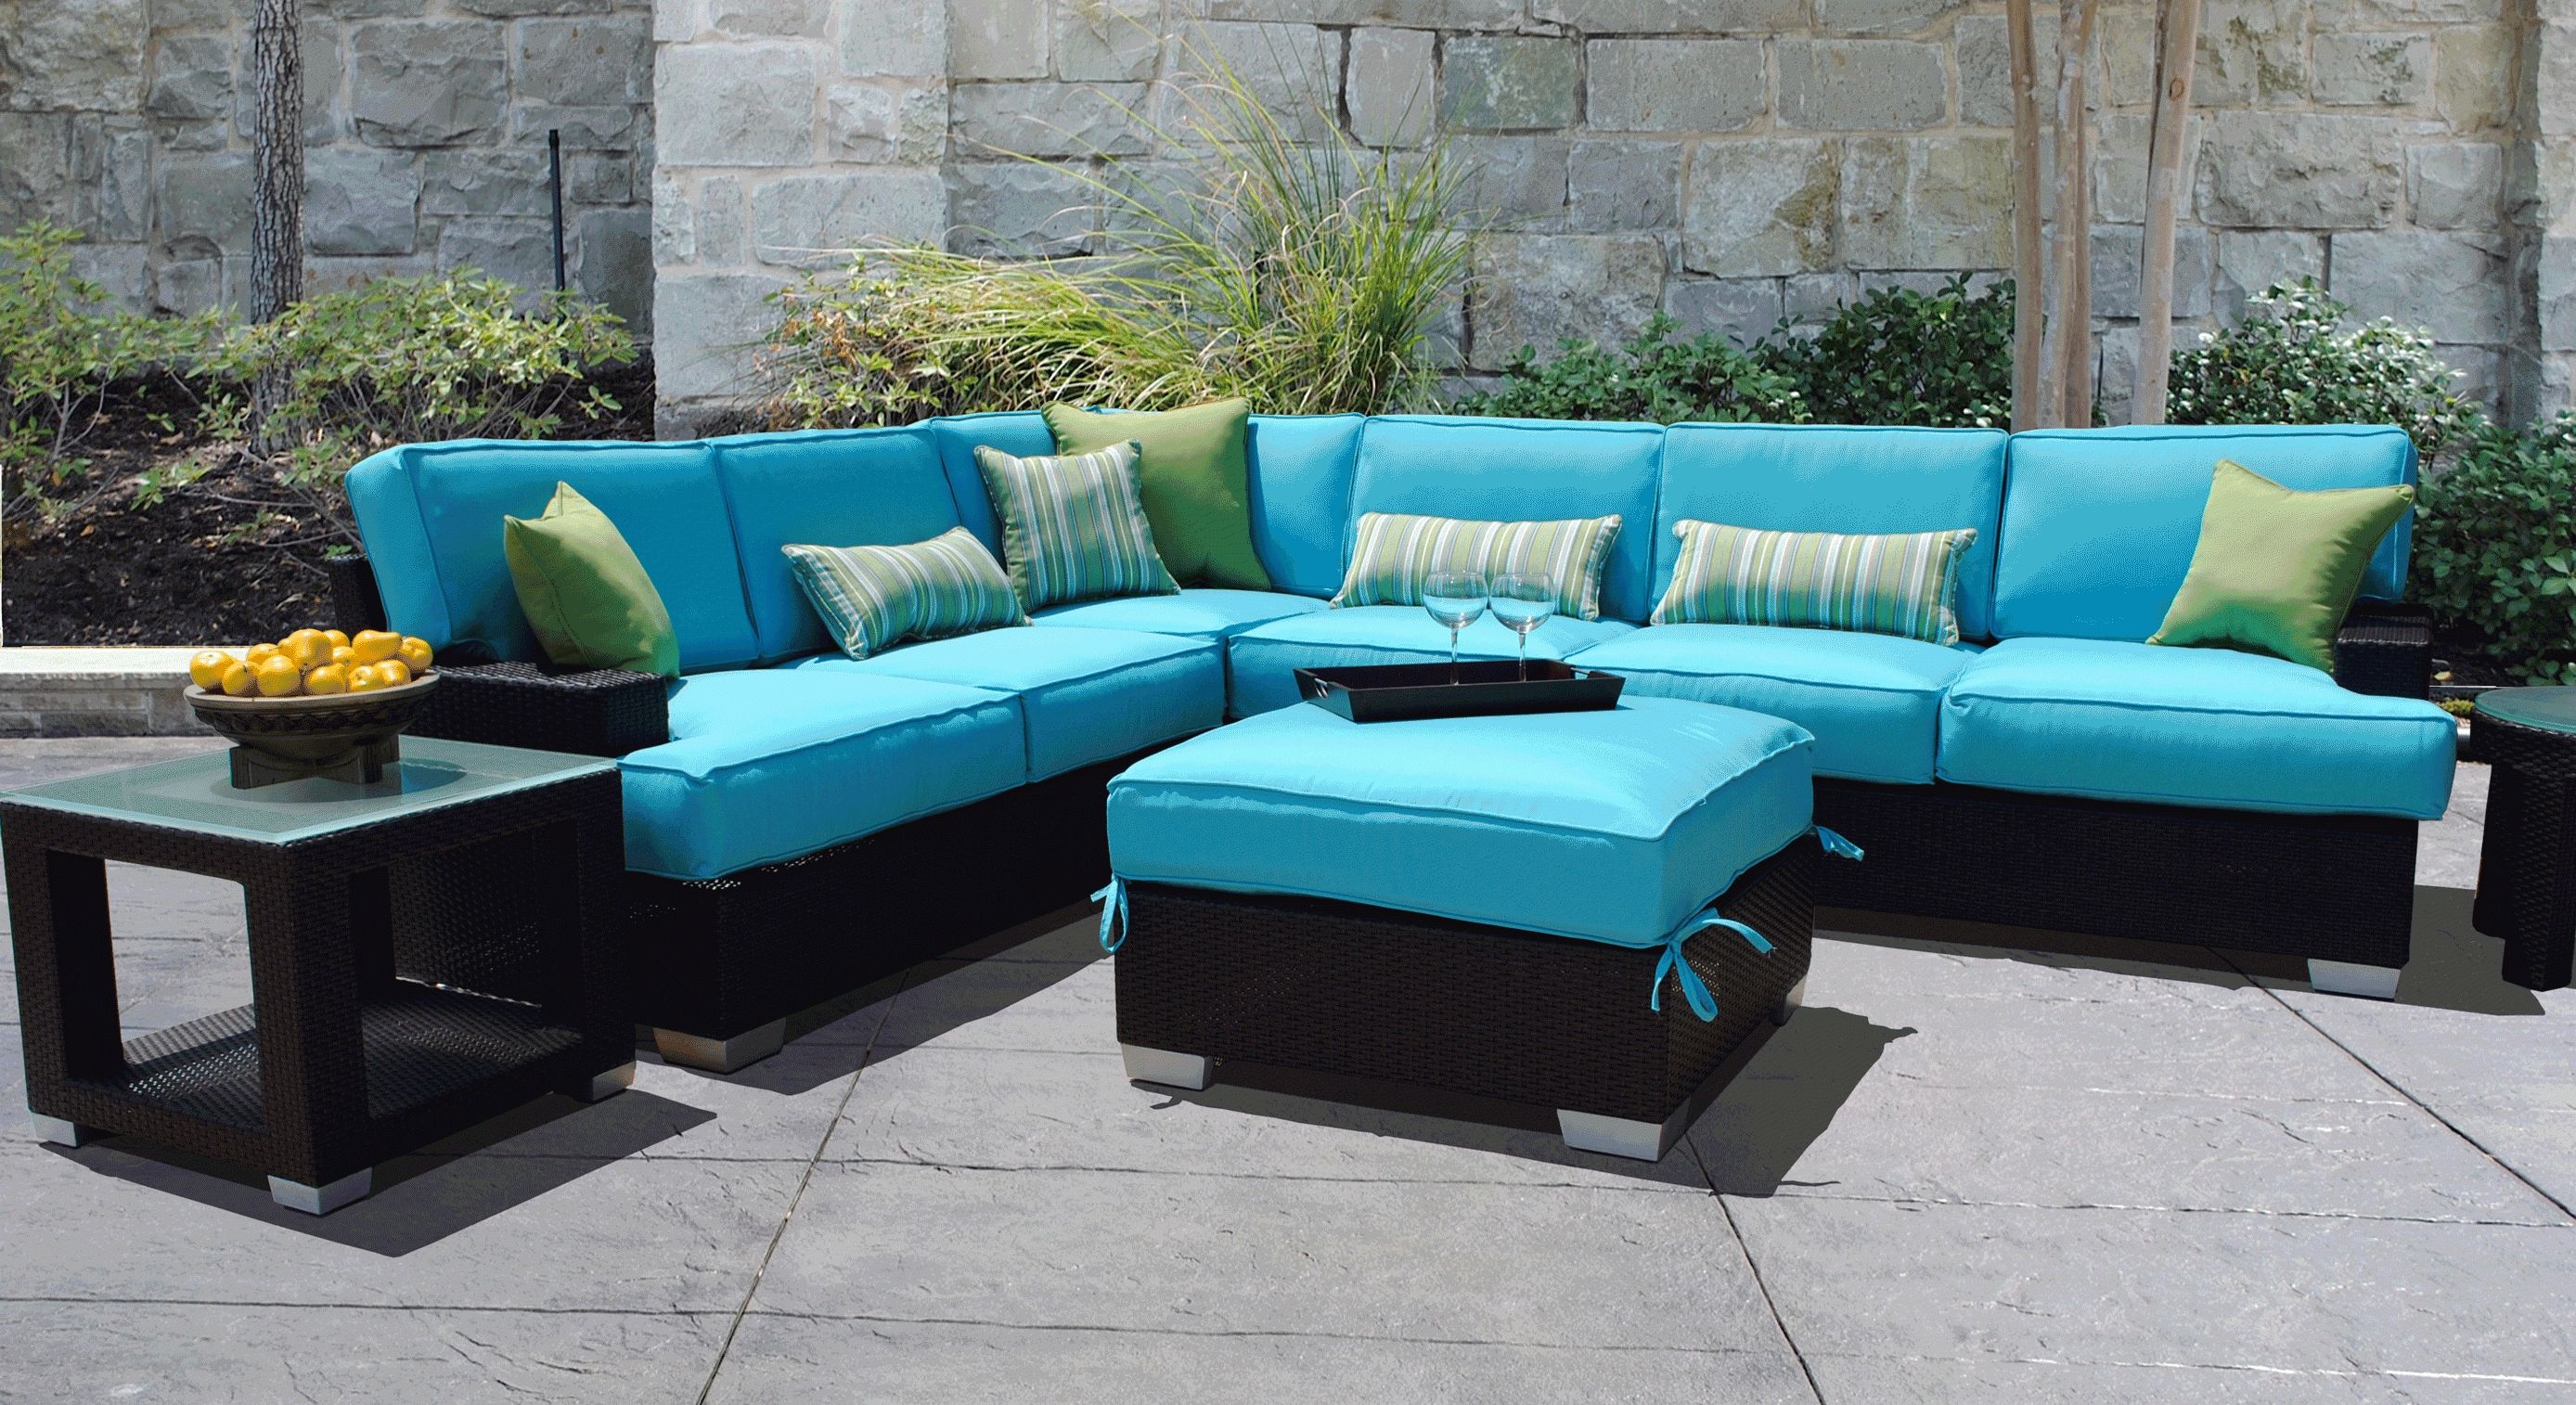 Furniture & Sofa: Enjoy Your Patio Decoration With Comfortable With Regard To Cheap Outdoor Sectionals (View 10 of 15)